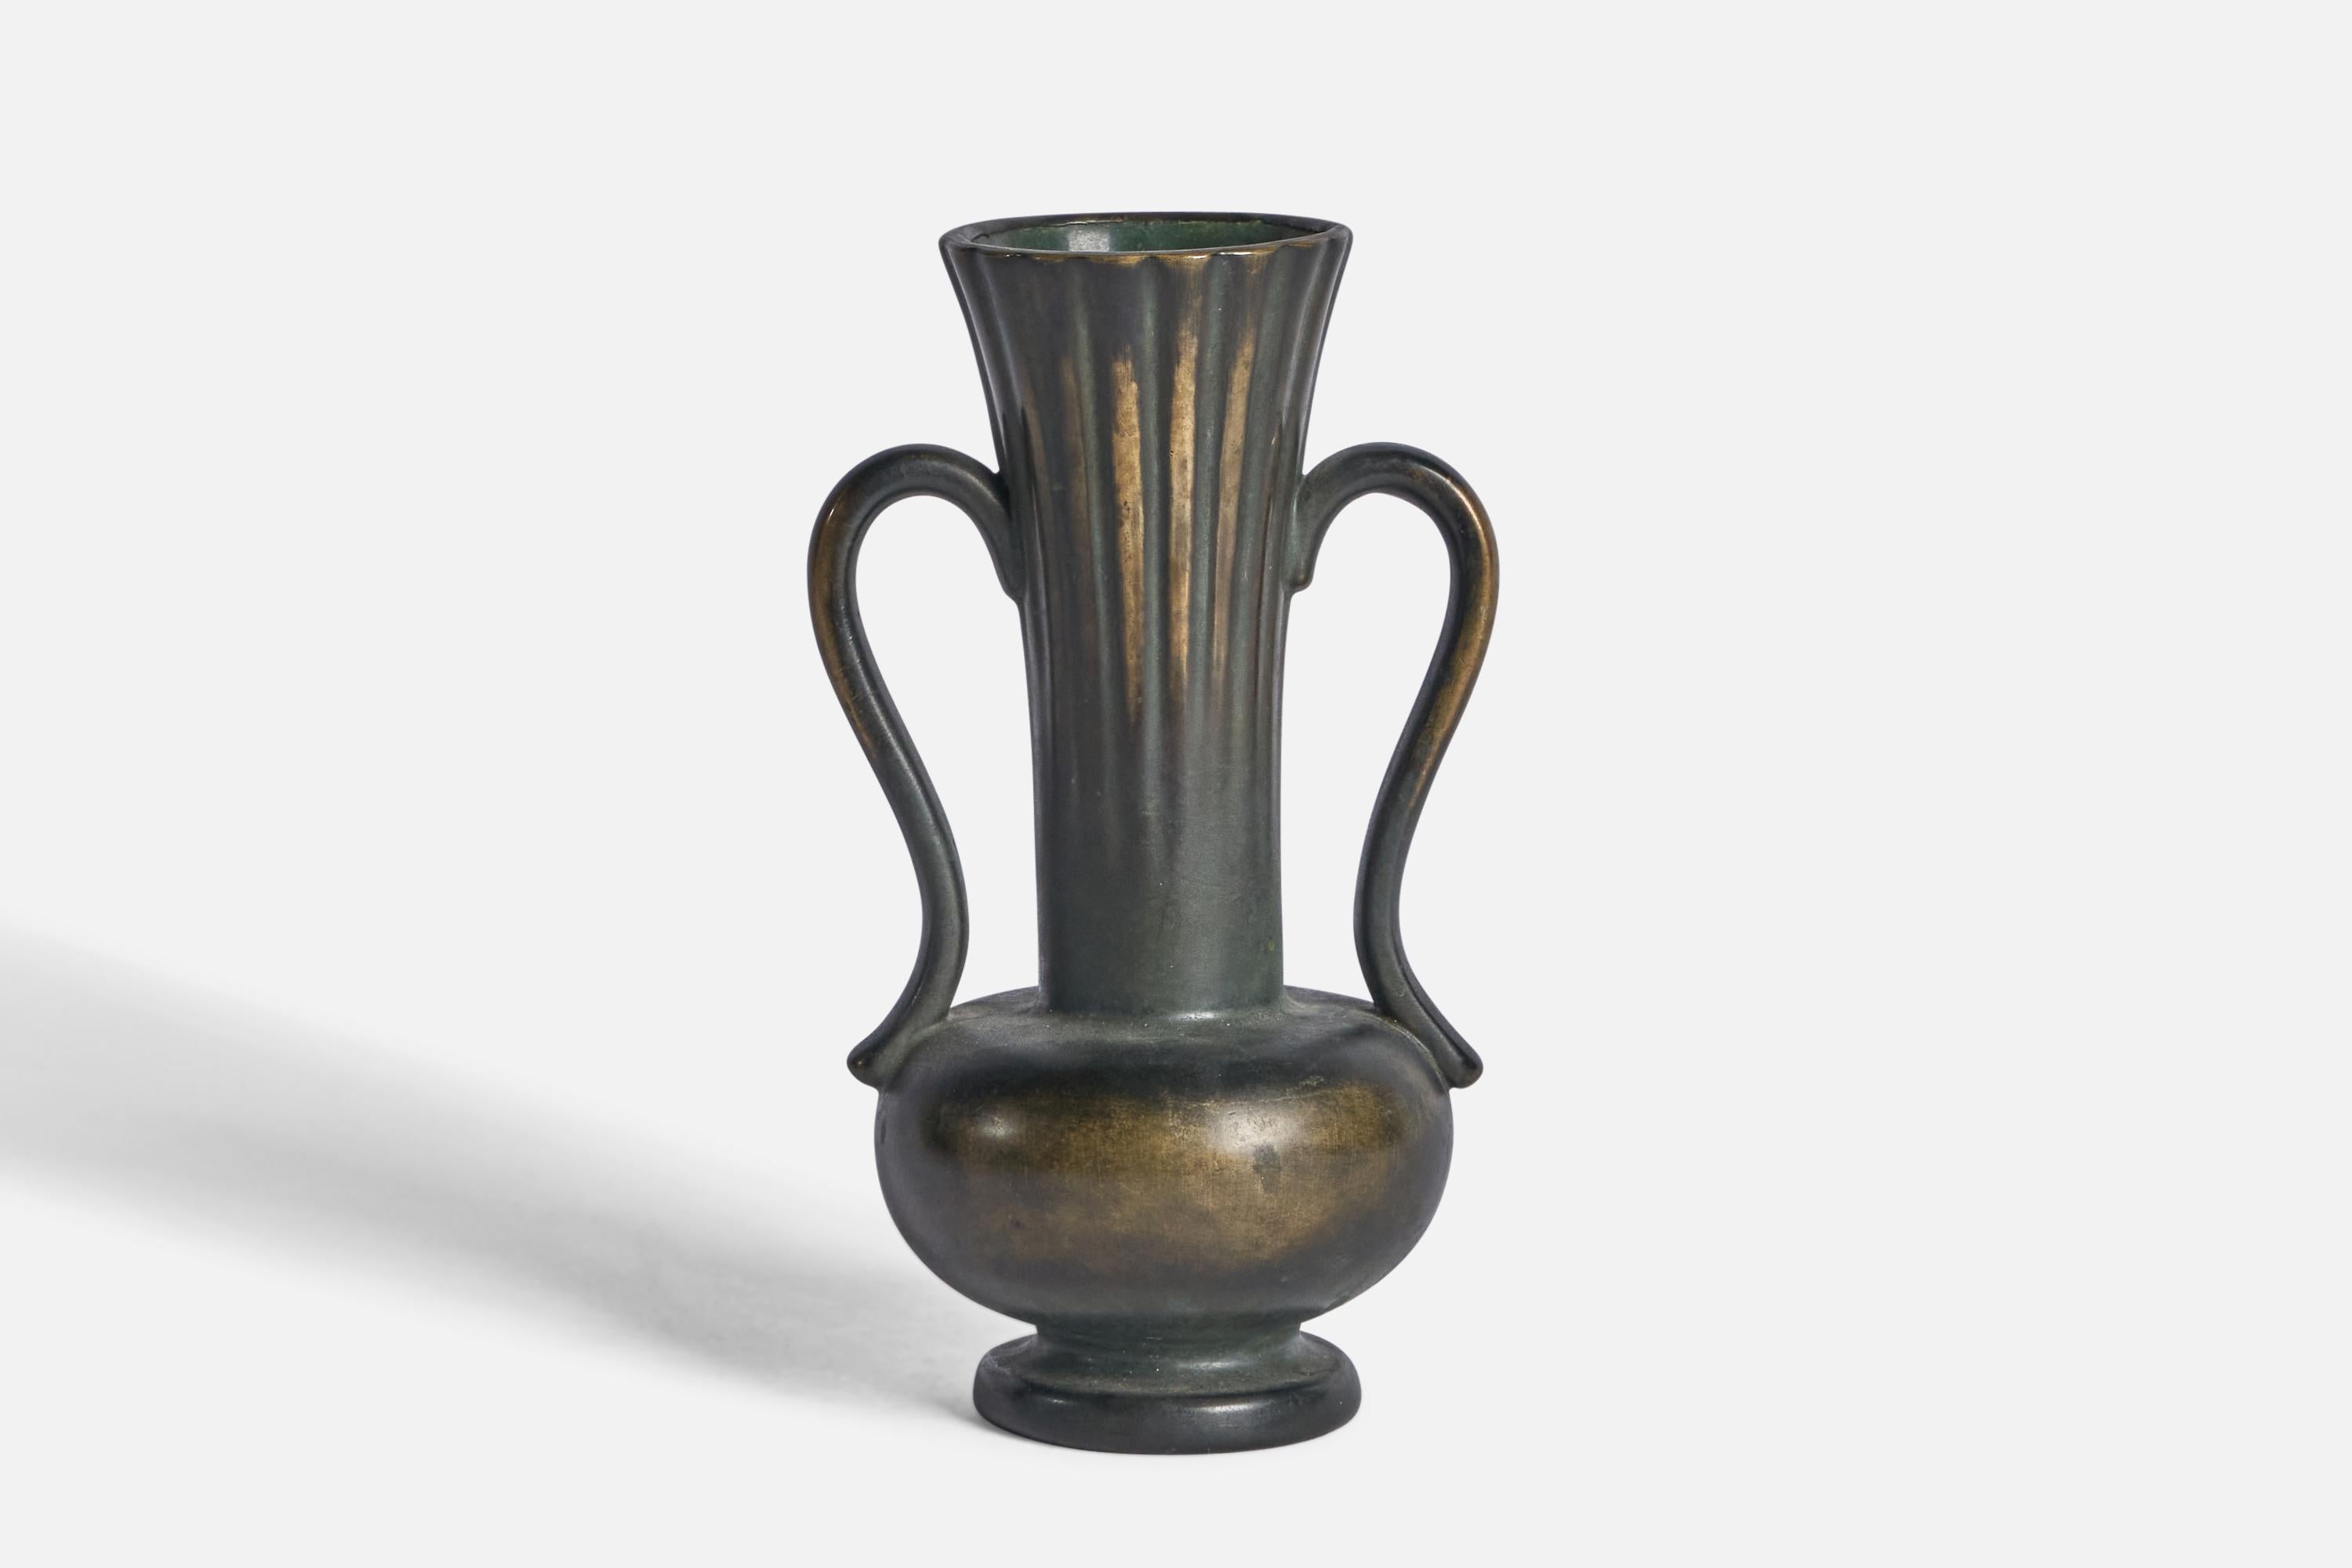 A bronze-glazed earthenware vase designed by Arthur Percy and produced by Gefle, Sweden, 1930s.